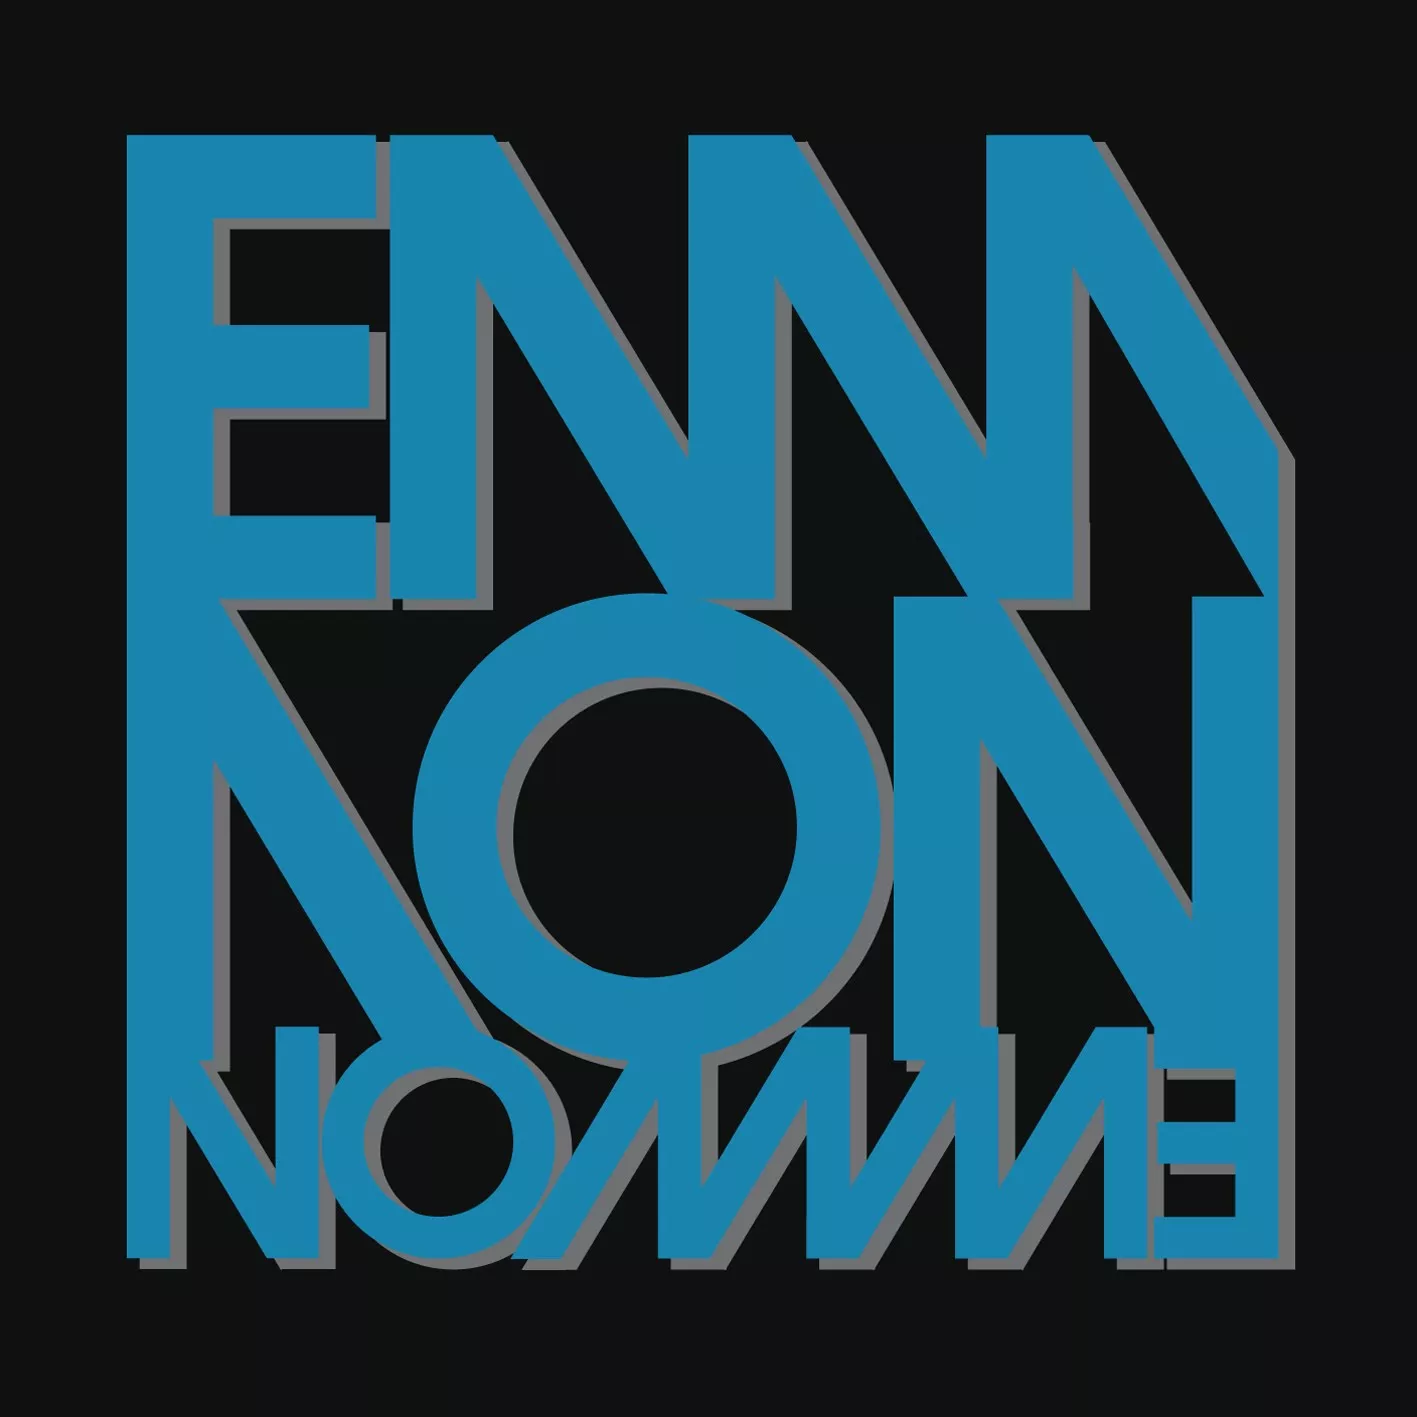 Nomme - Emmon